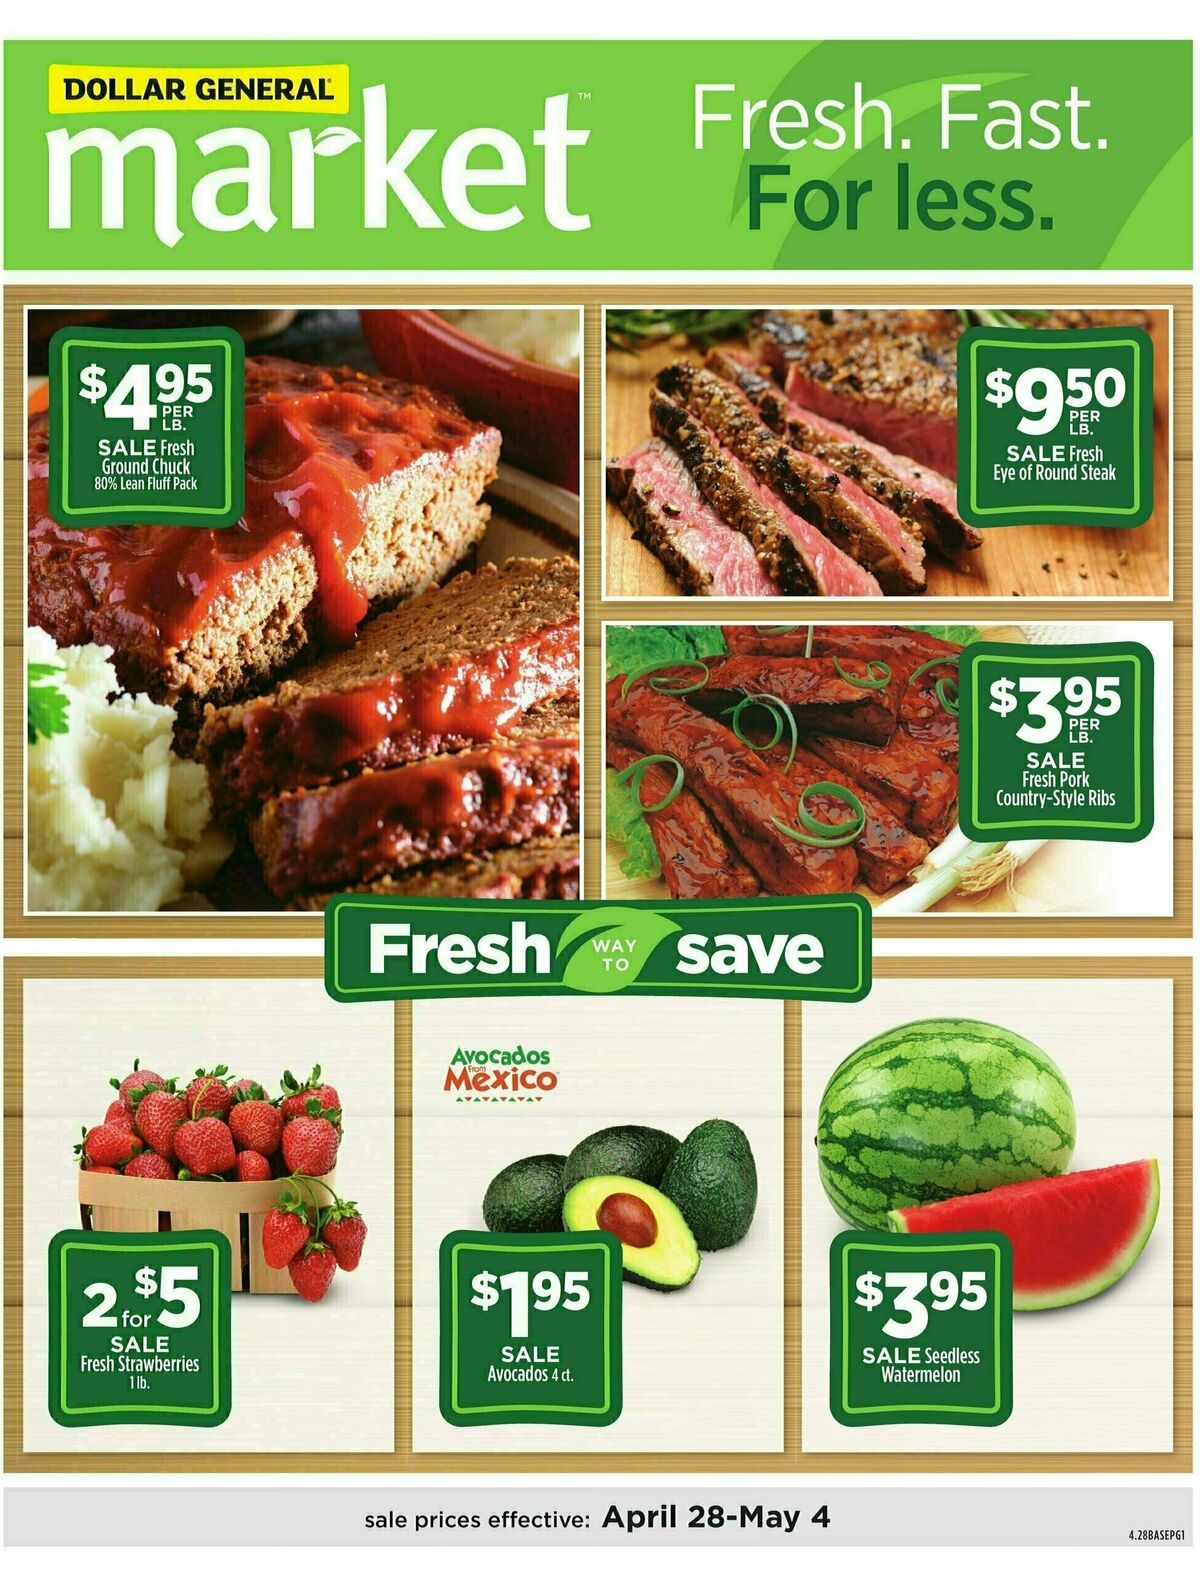 Dollar General Market Ad Weekly Ad from April 28